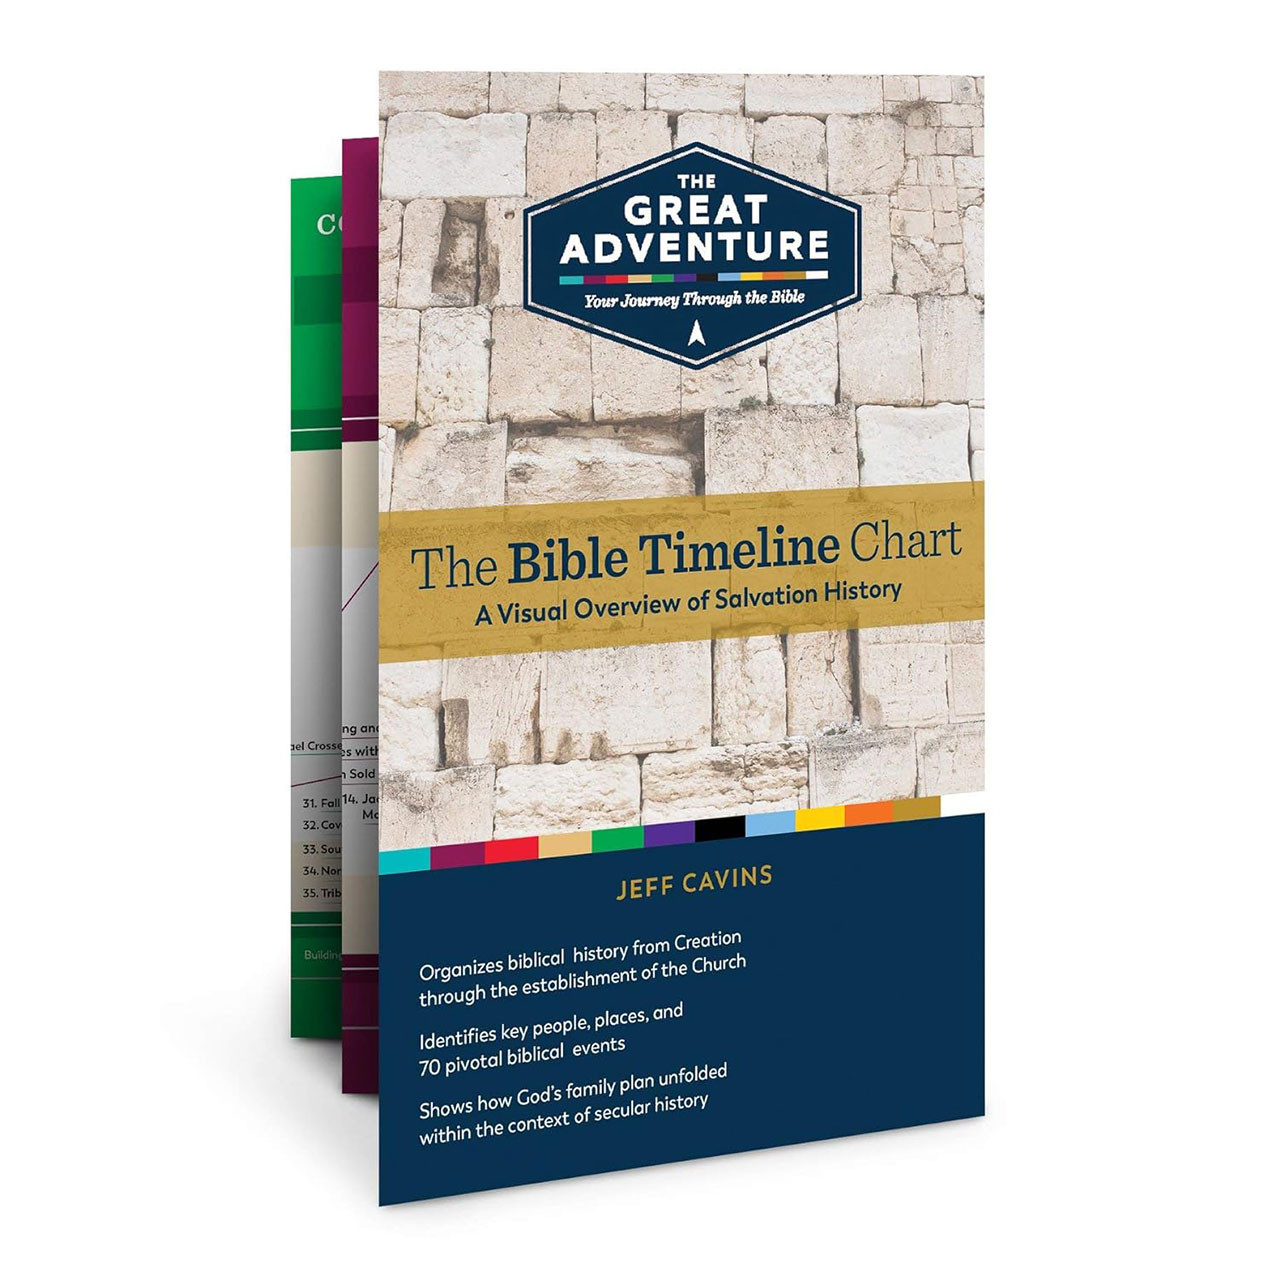 Great Adventure Bible Timeline Chart that measures 5-1/2"W x 8-1/2"H when completely folded